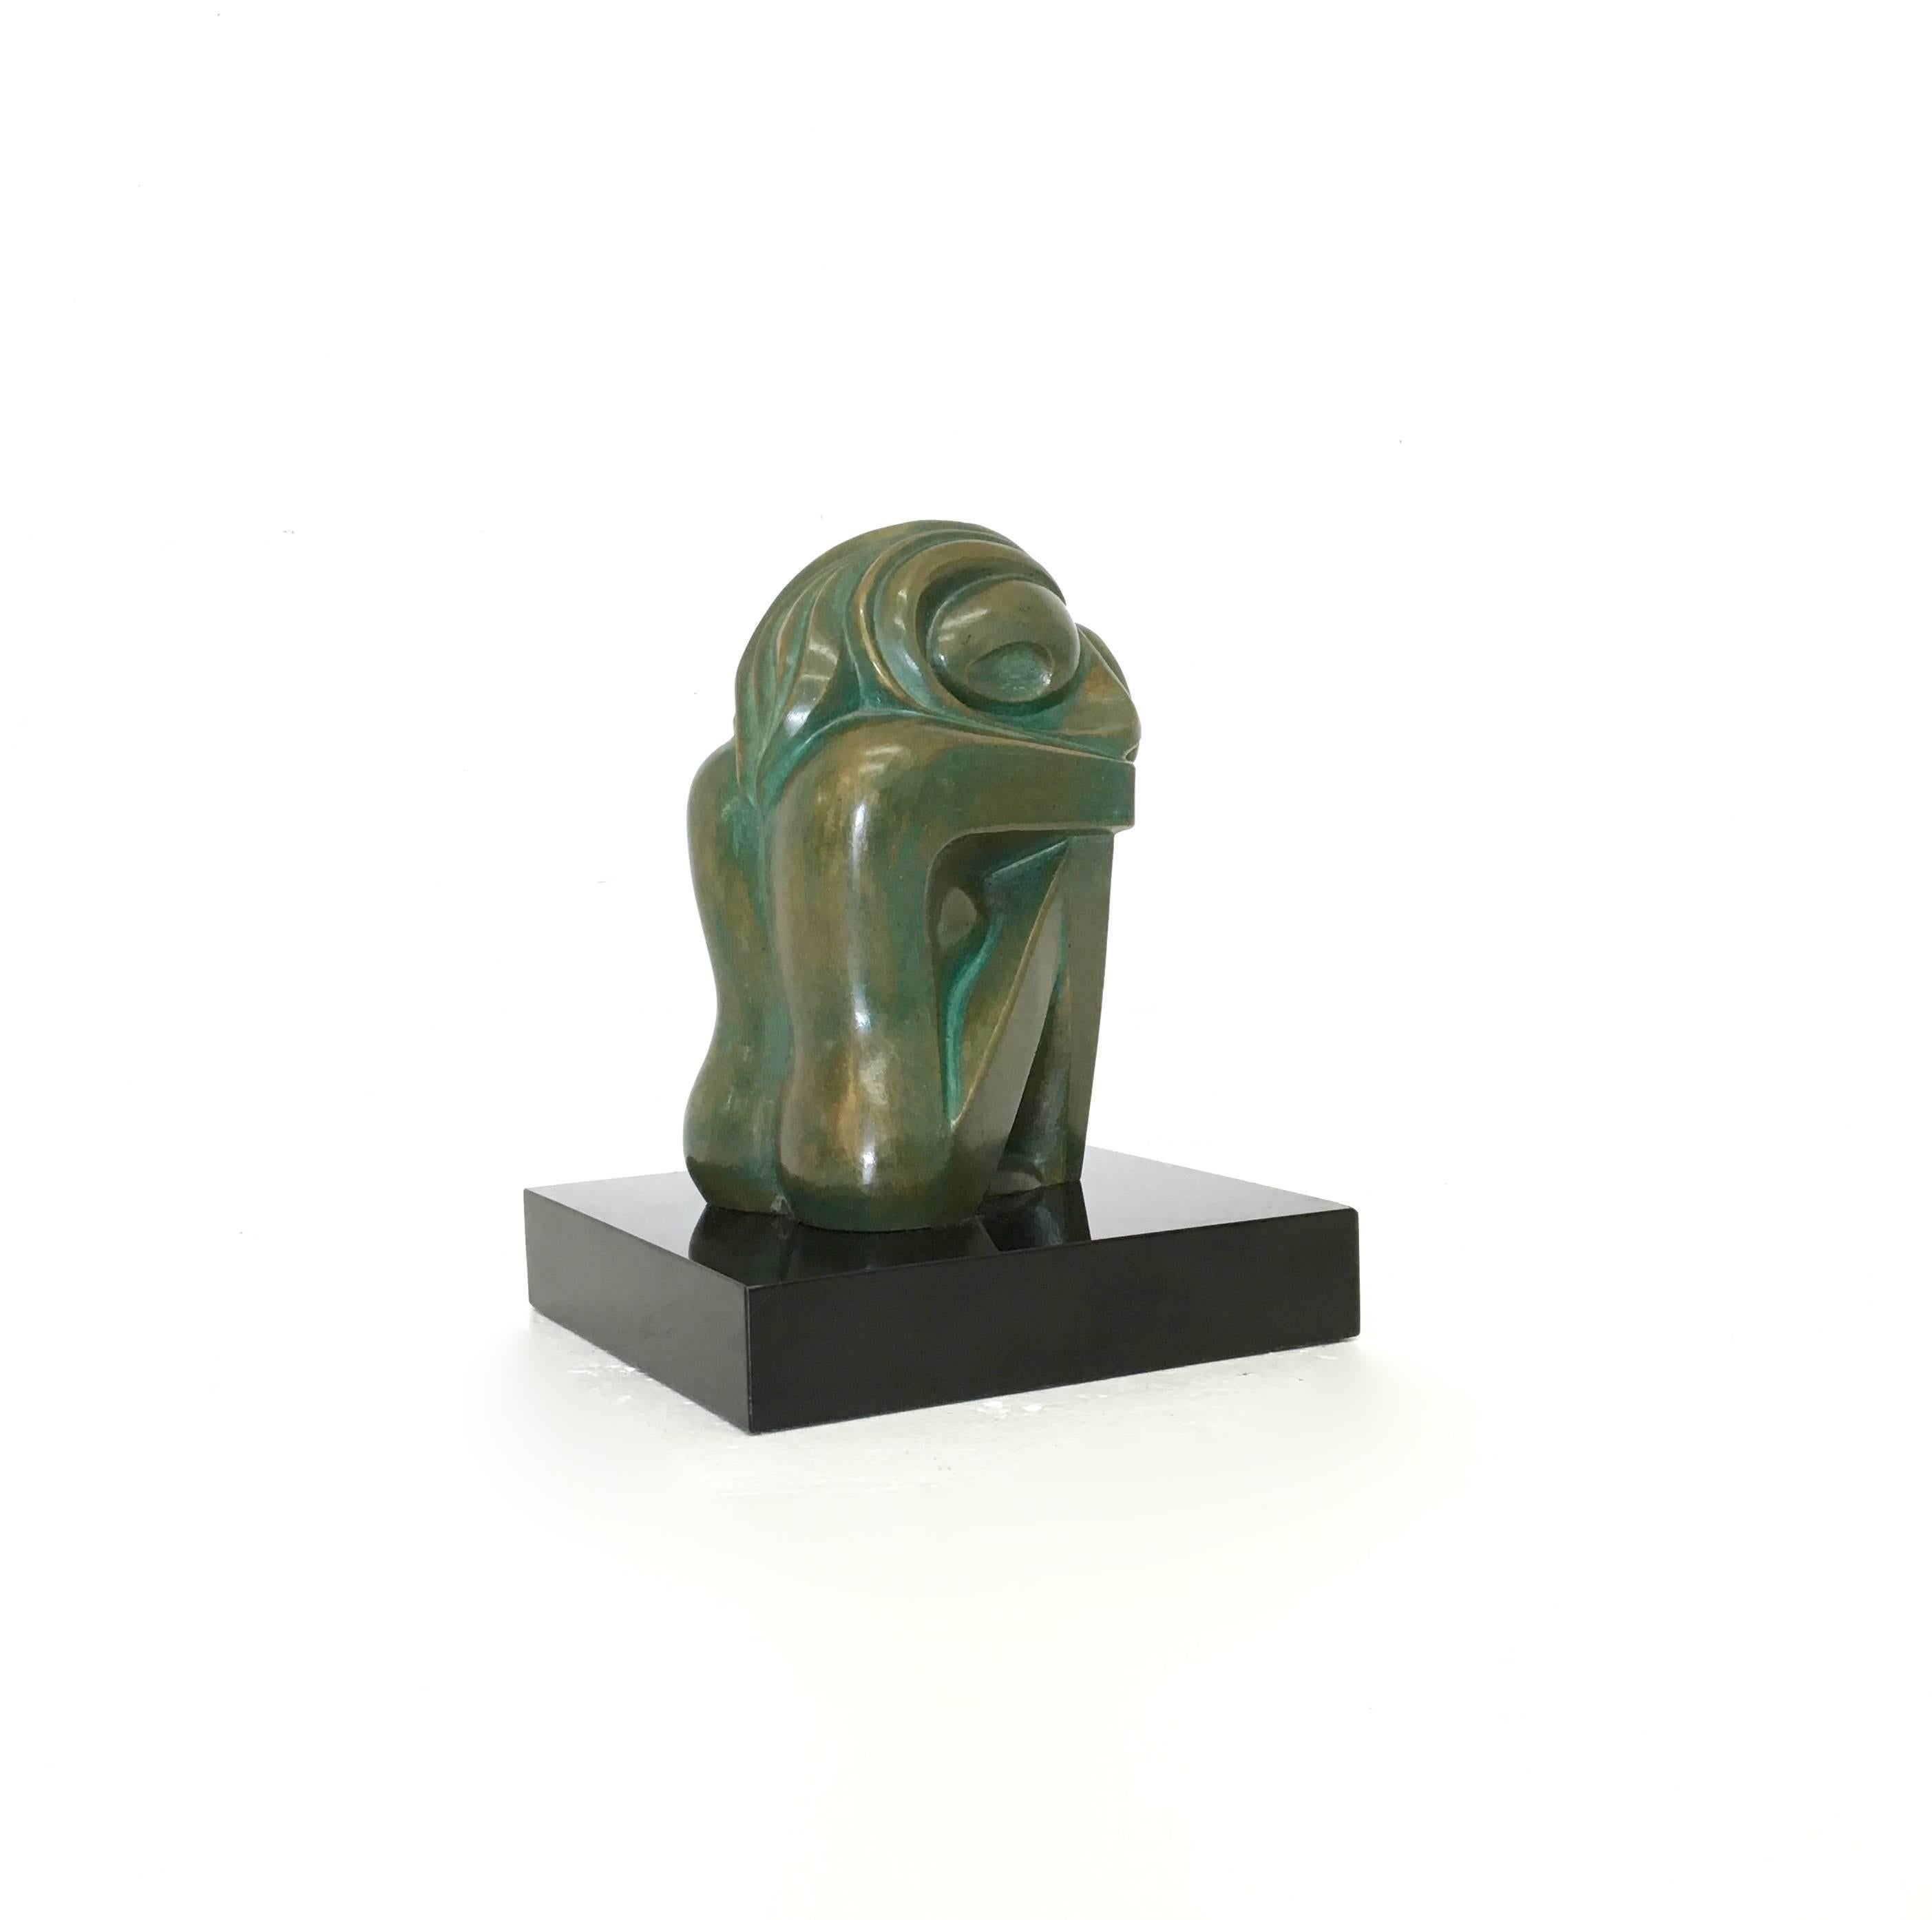 Mid-Century bronze nude by Jose Ledesma Zavala created in the 1950s which is accompanied with a letter of authenticity. There is a wash on the bronze giving it a green hue in the curves of the bronze. 
Set on a black polished stone base measuring